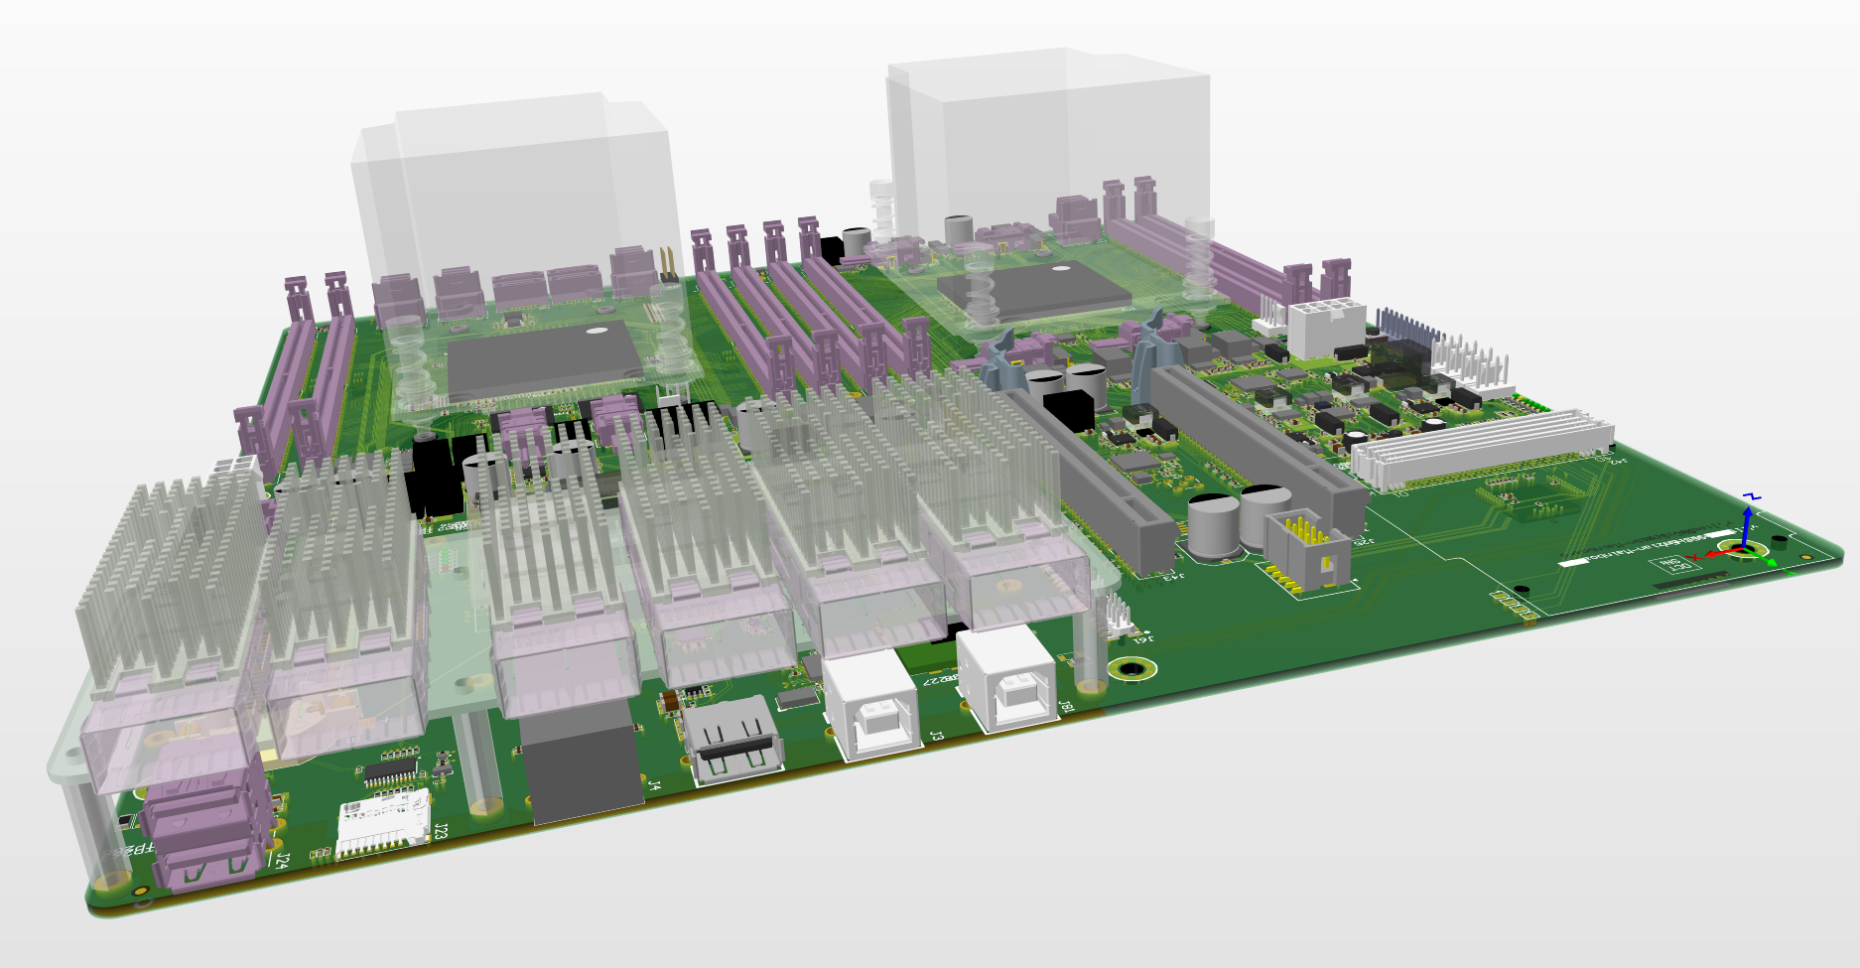 Rendering of an Enzian board with its components.